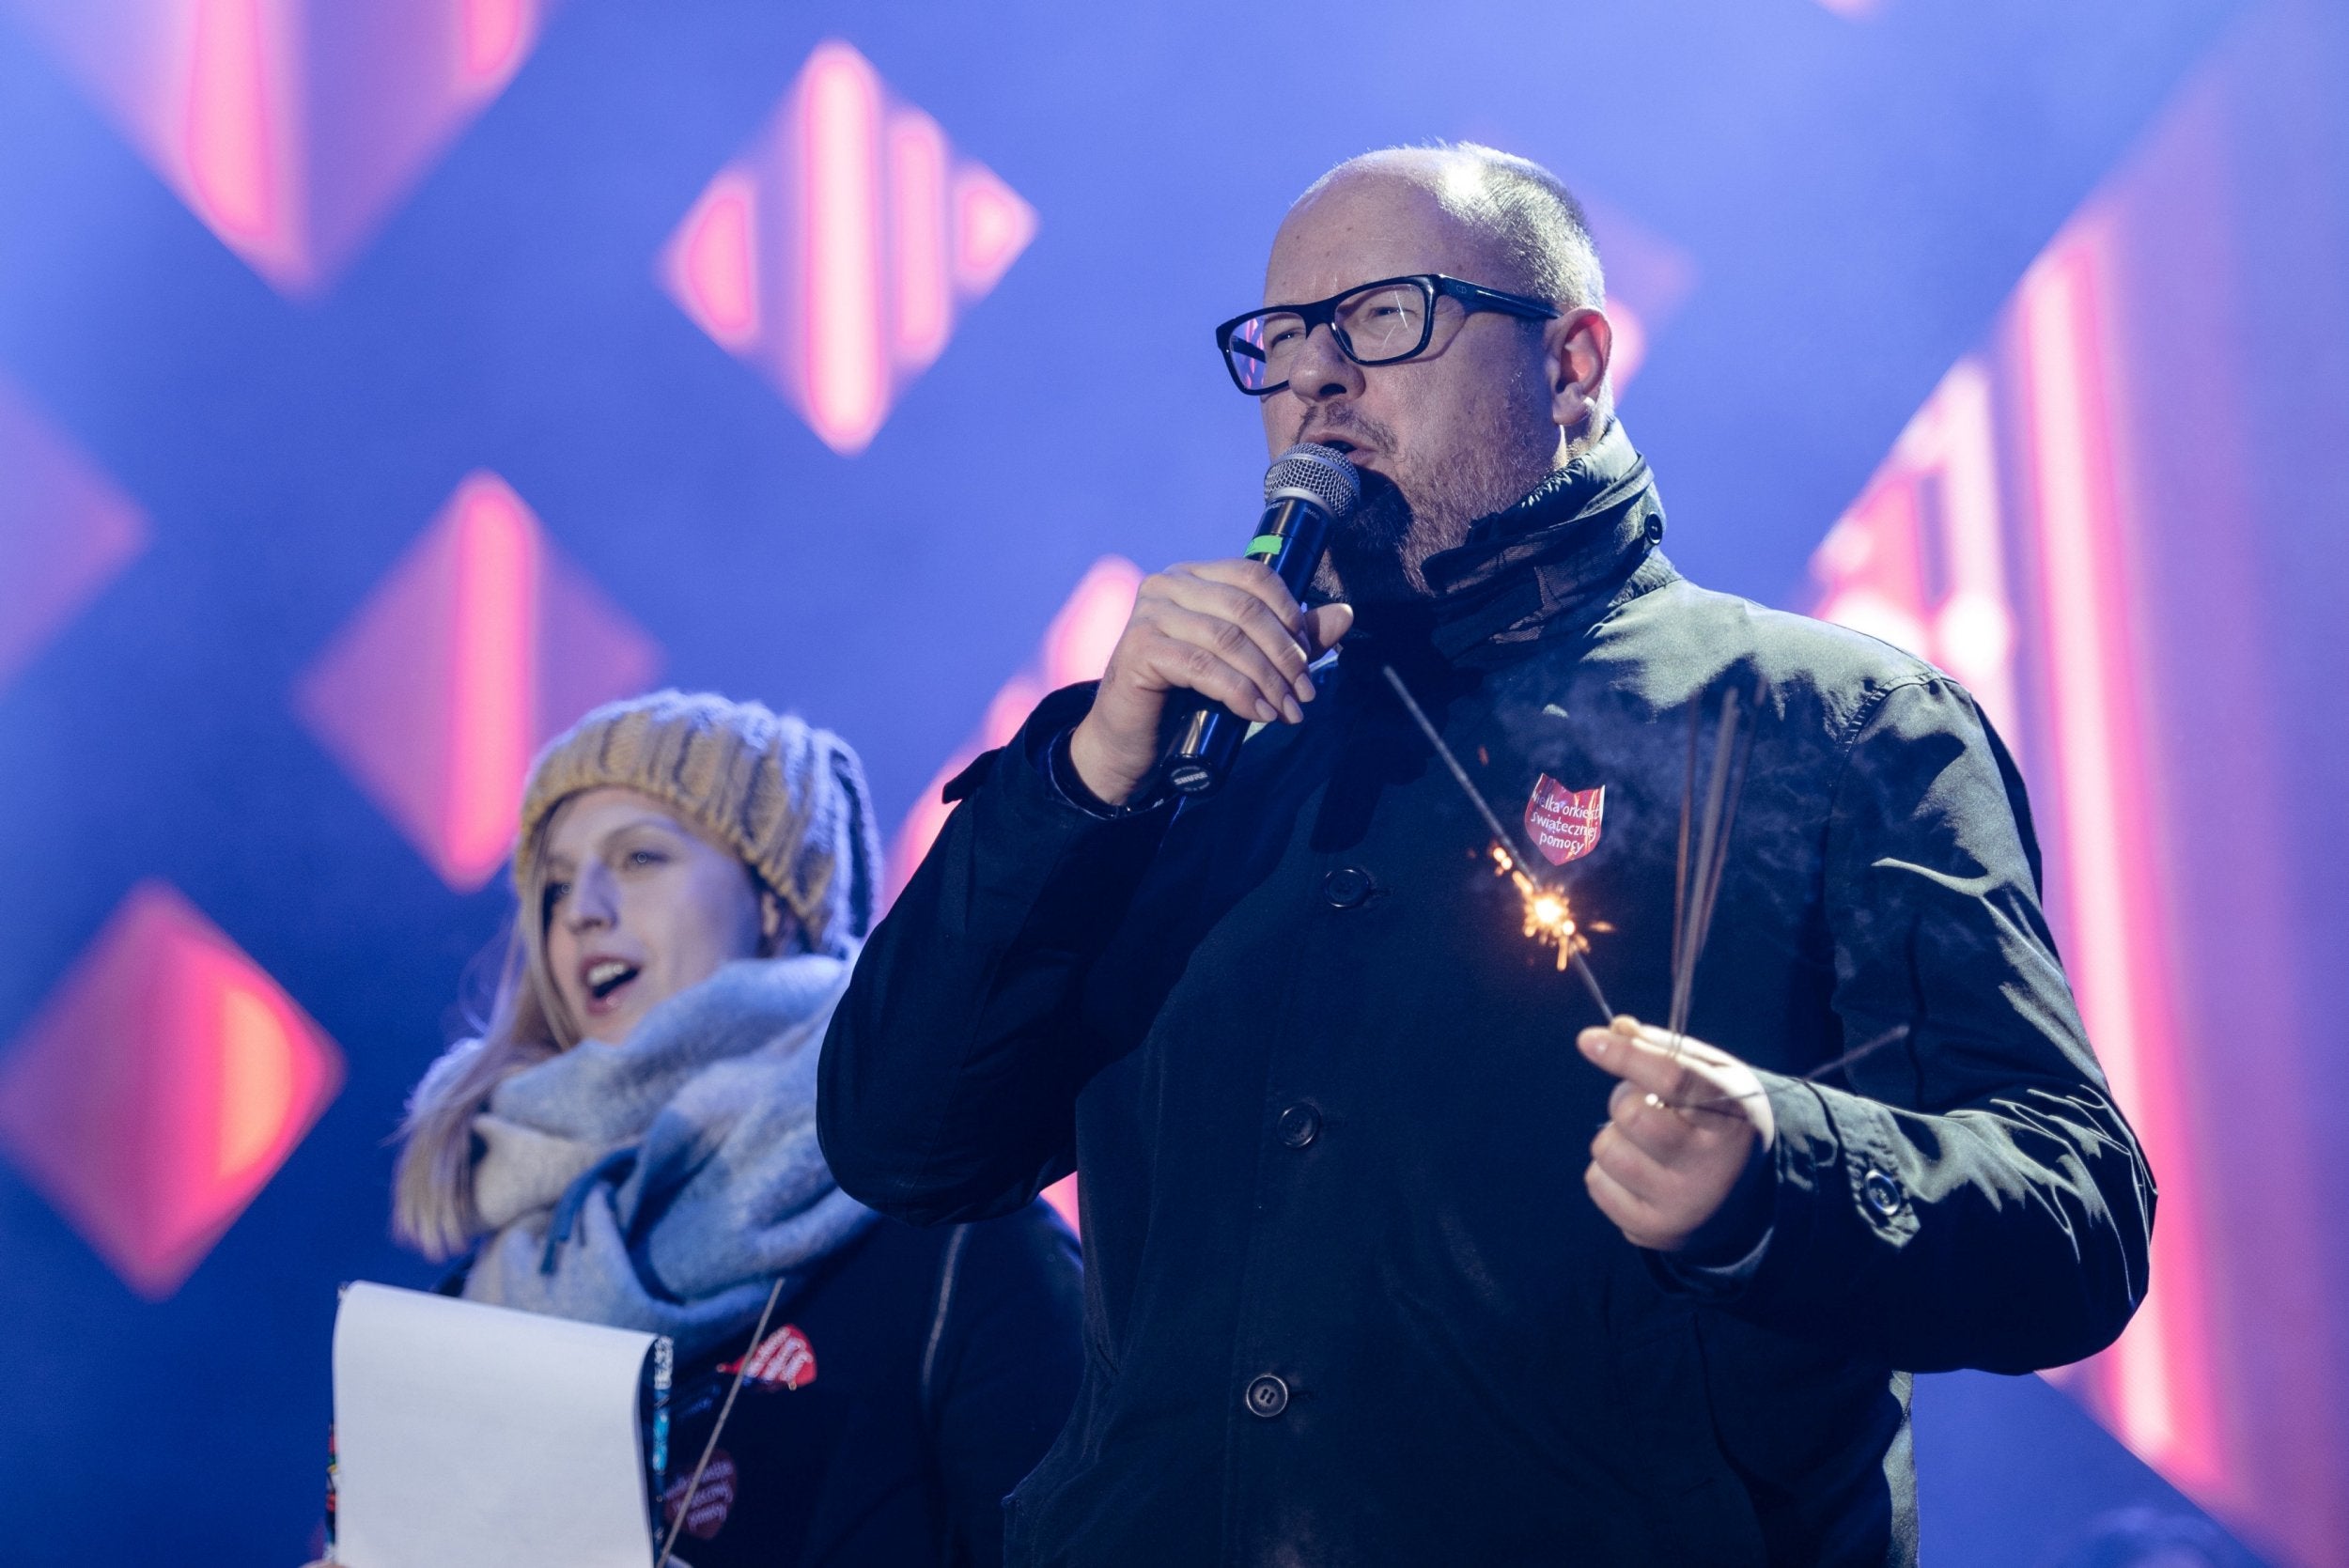 On stage in Gdansk shortly before the attack on 13 January